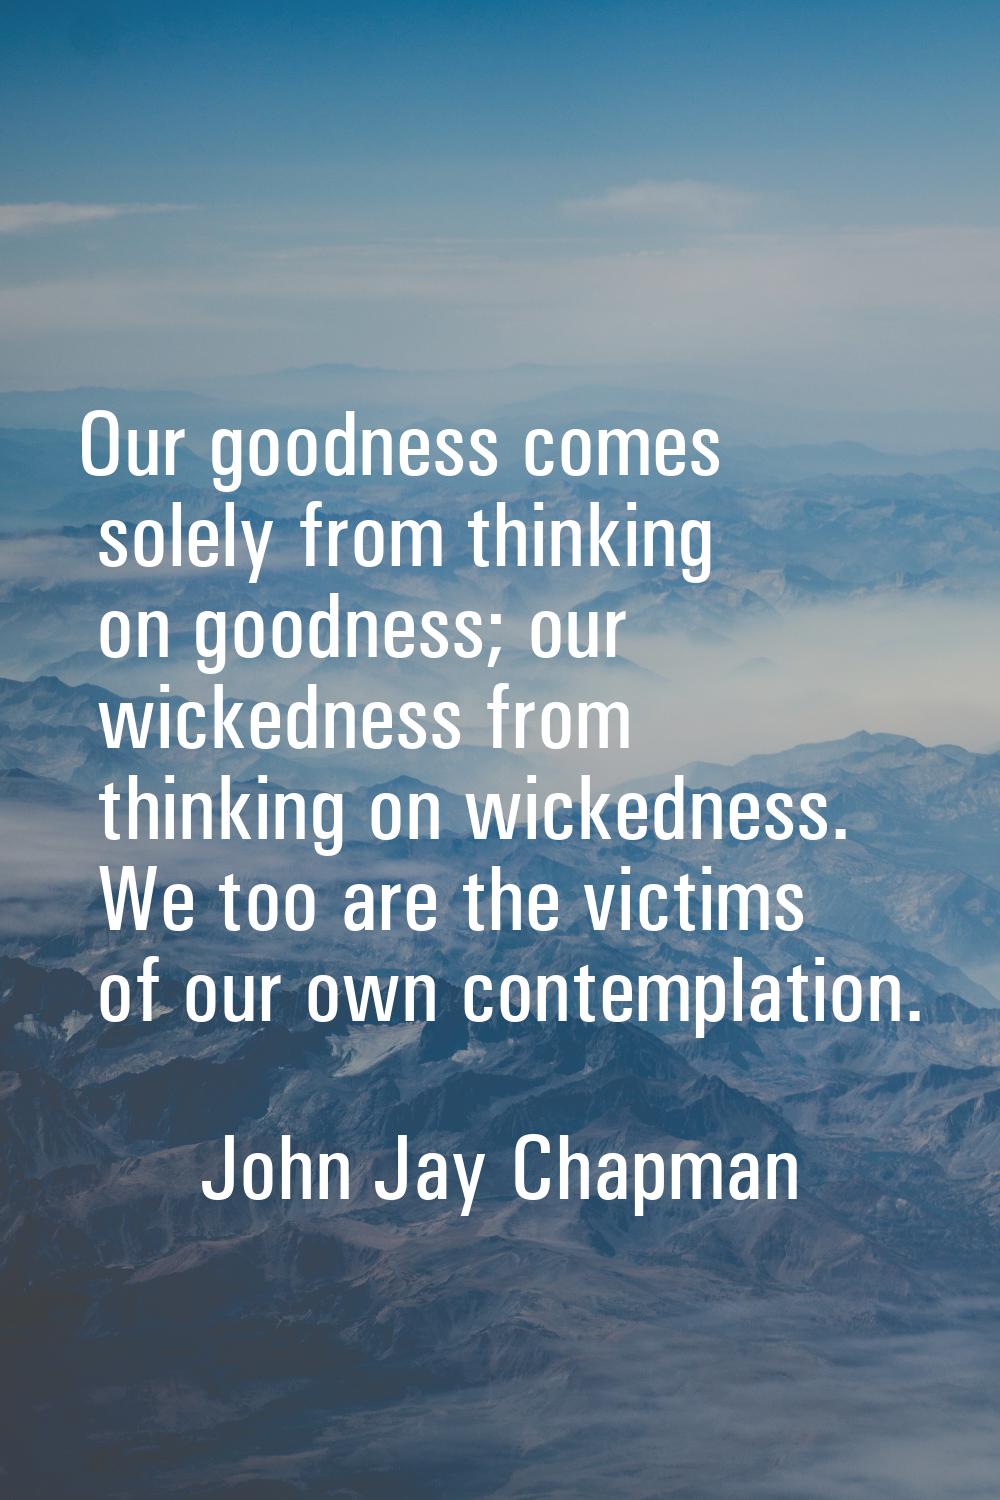 Our goodness comes solely from thinking on goodness; our wickedness from thinking on wickedness. We